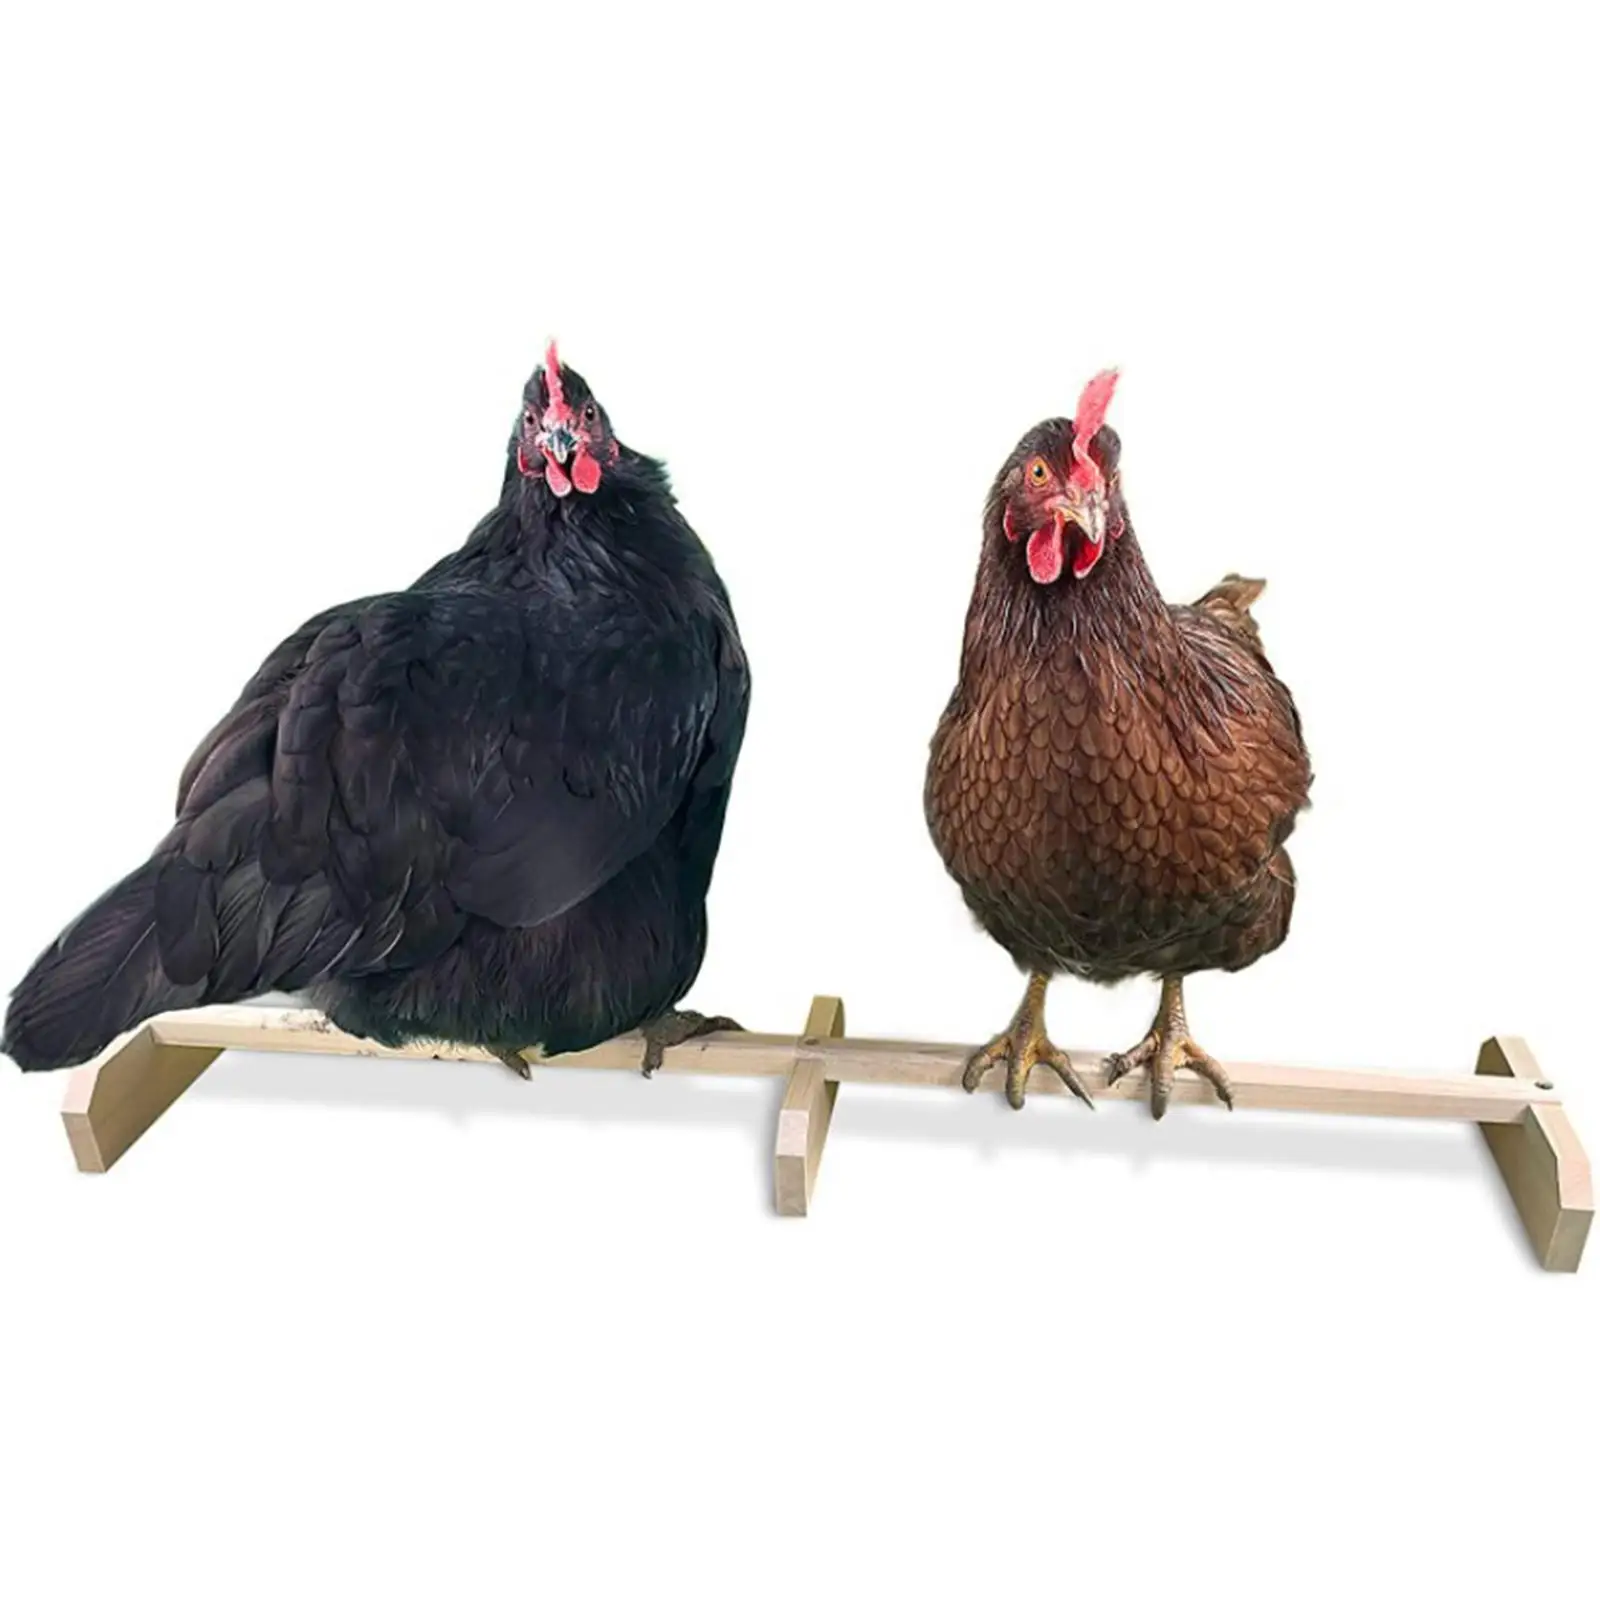 Wooden Chicken Perch Chicken Roost Accessories Chicken Toys Roosting Bar Chicken Wood Stand for Baby Chicks Macaw Hens Parrot